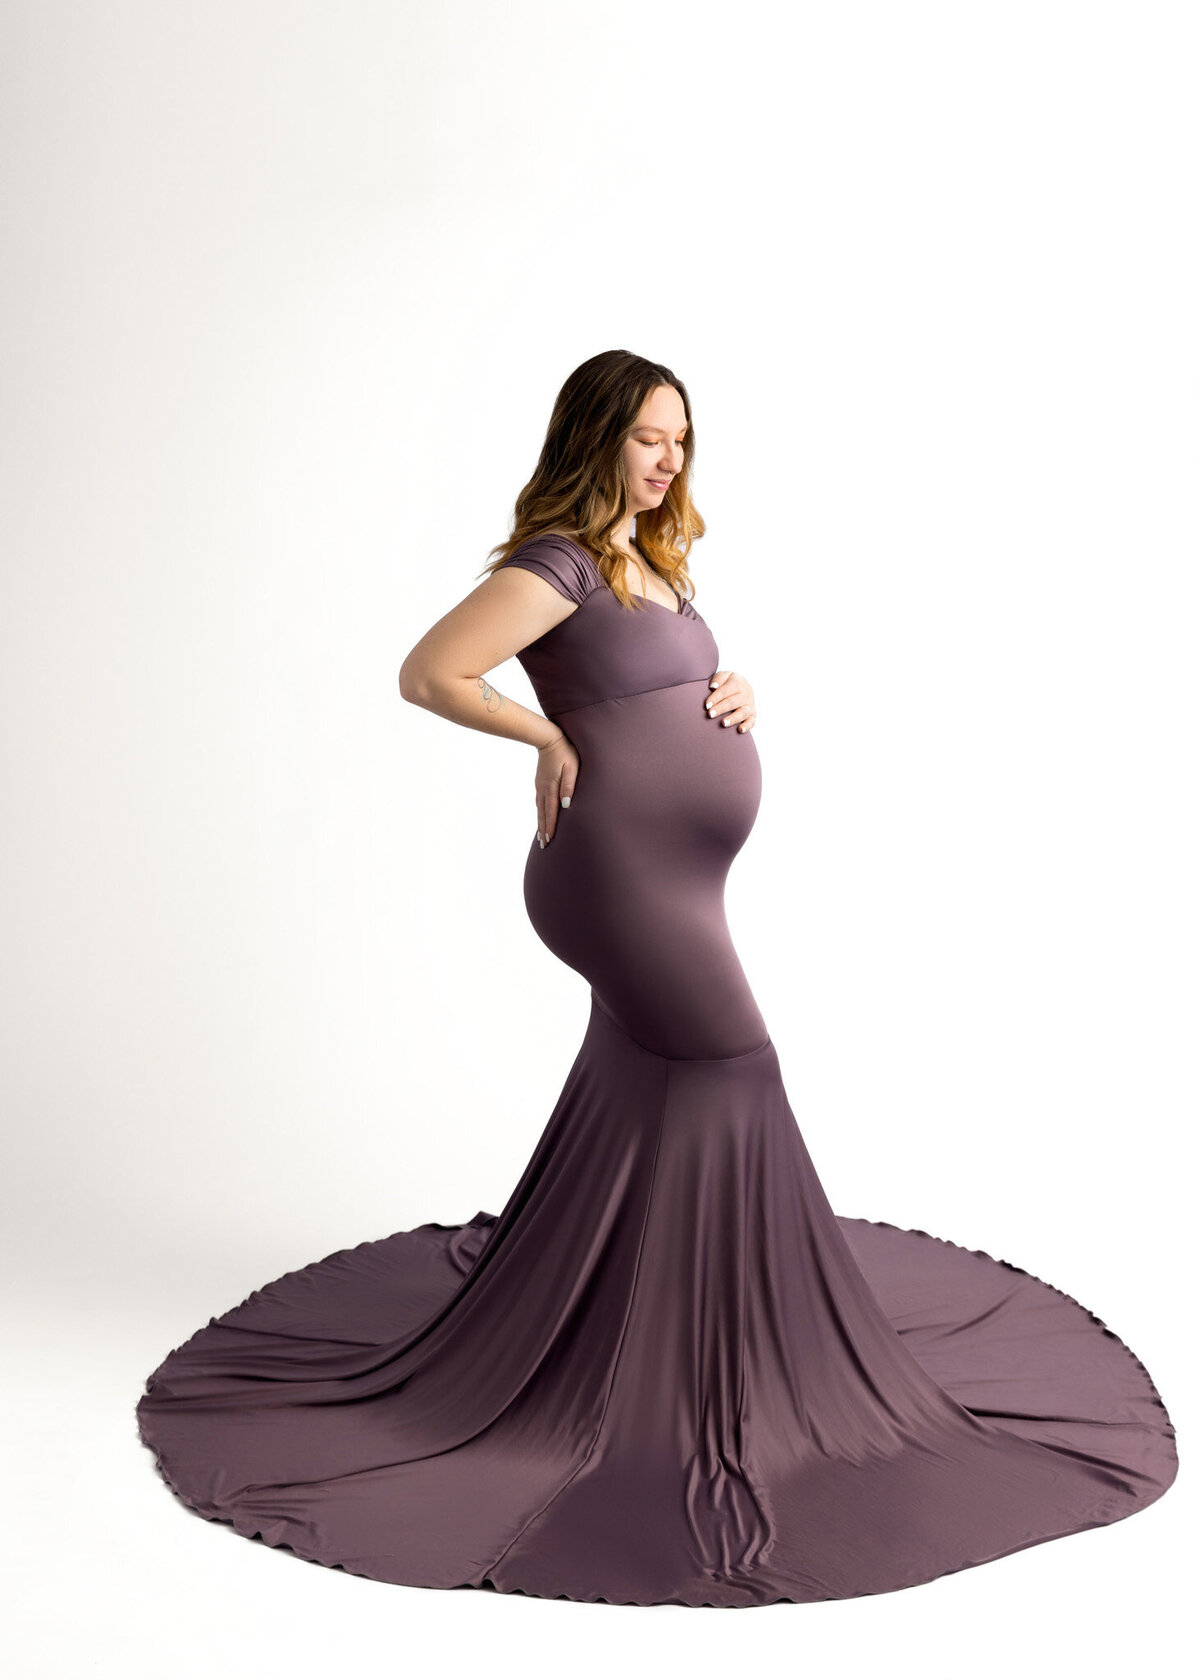 prenant woman with her hand on her belly wearing a purple dress